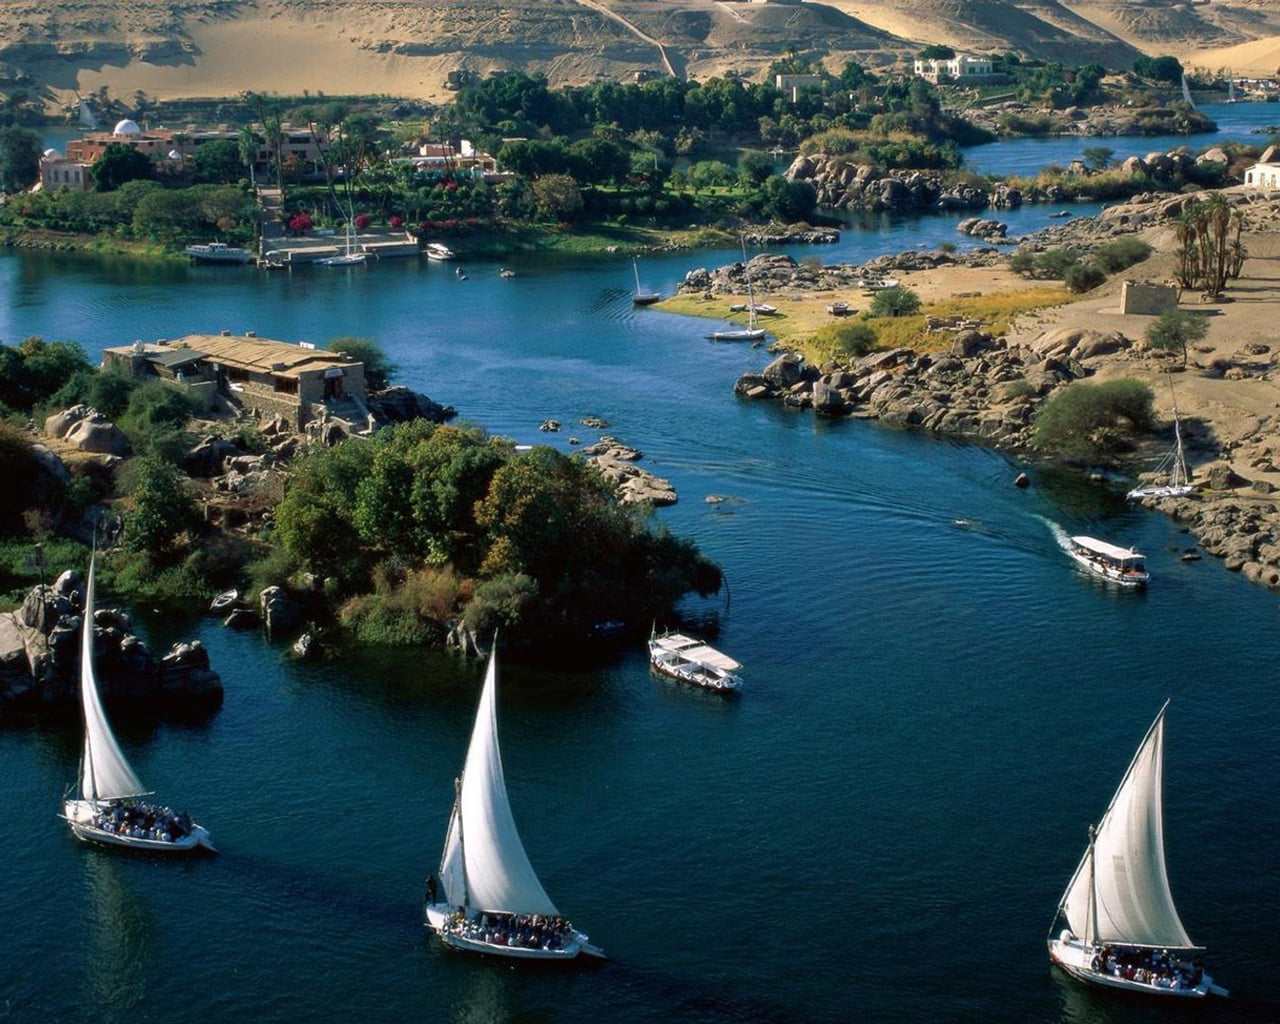 The Nile in Africa.